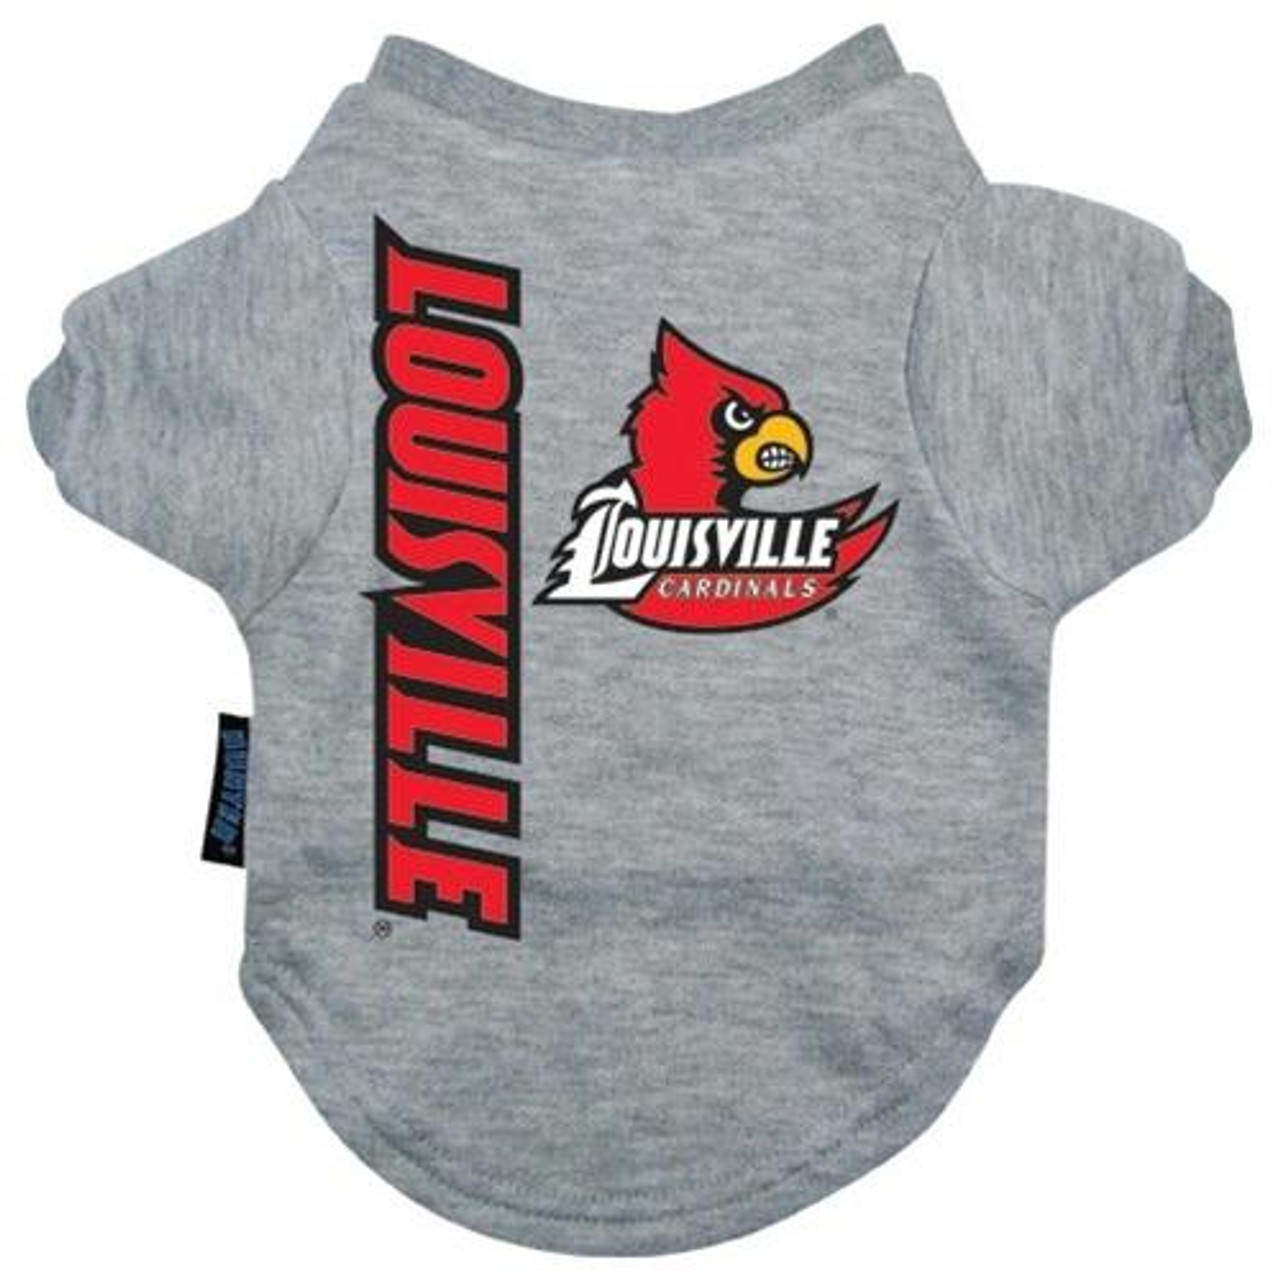 louisville cardinal clothes for toddler